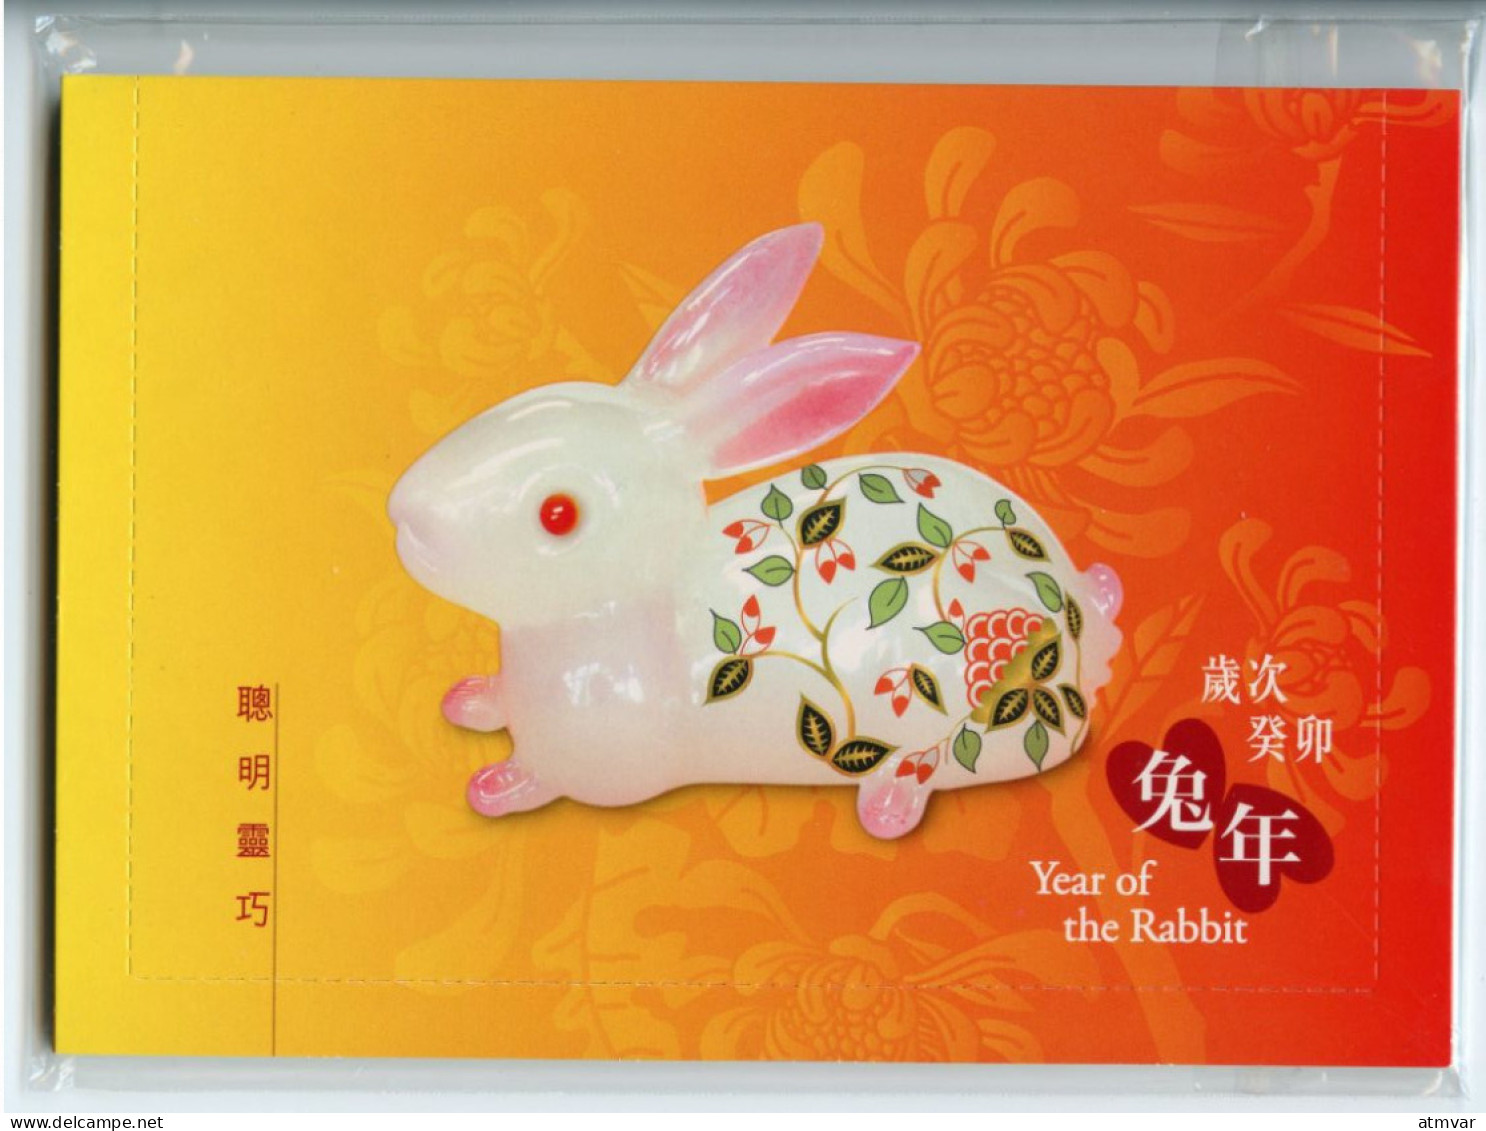 HONG KONG (2023) Postage Prepaid Lunar Year Greeeting Card - Year Of The Rabbit - Set Of Four Postcards Airmail - Mint - Ganzsachen